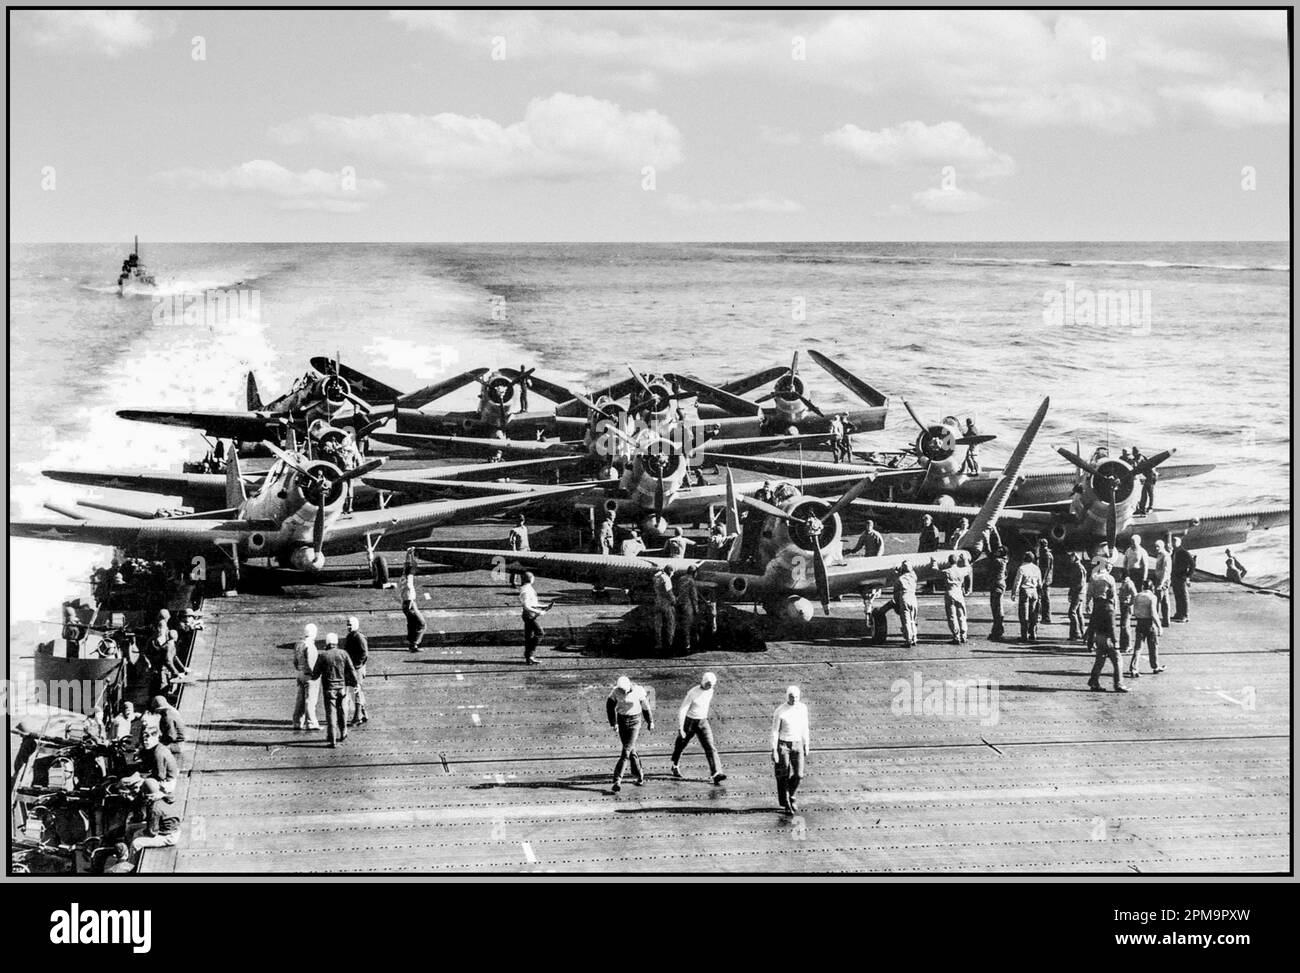 BATTLE OF MIDWAY WW2 US Douglas-TBD-1-torpedo-bombers unfold their wings for takeoff from the USS Enterprise aircraft carrier during the Battle of Midway, June 4, 1942 The Battle of Midway was a major naval battle in the Pacific Theater of World War II that took place 4–7 June 1942, Stock Photo